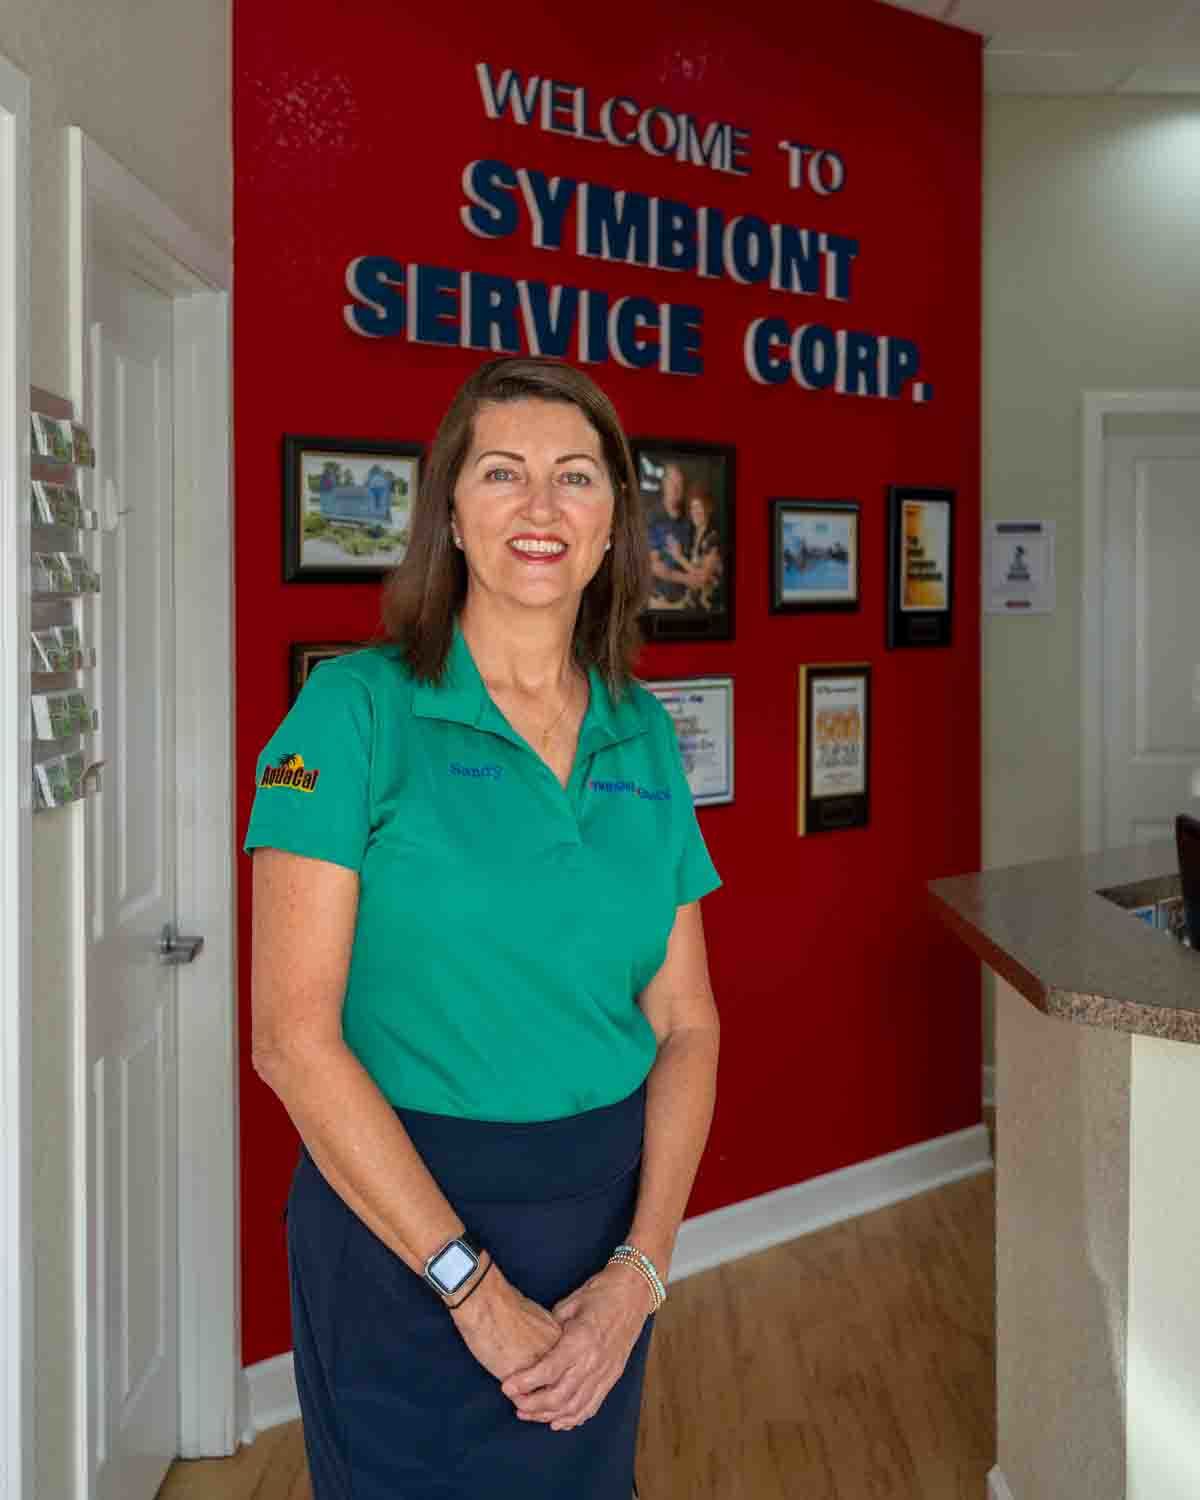 Lori Sax. Sandy King has owned Symbiont Service Corp. since 2007.